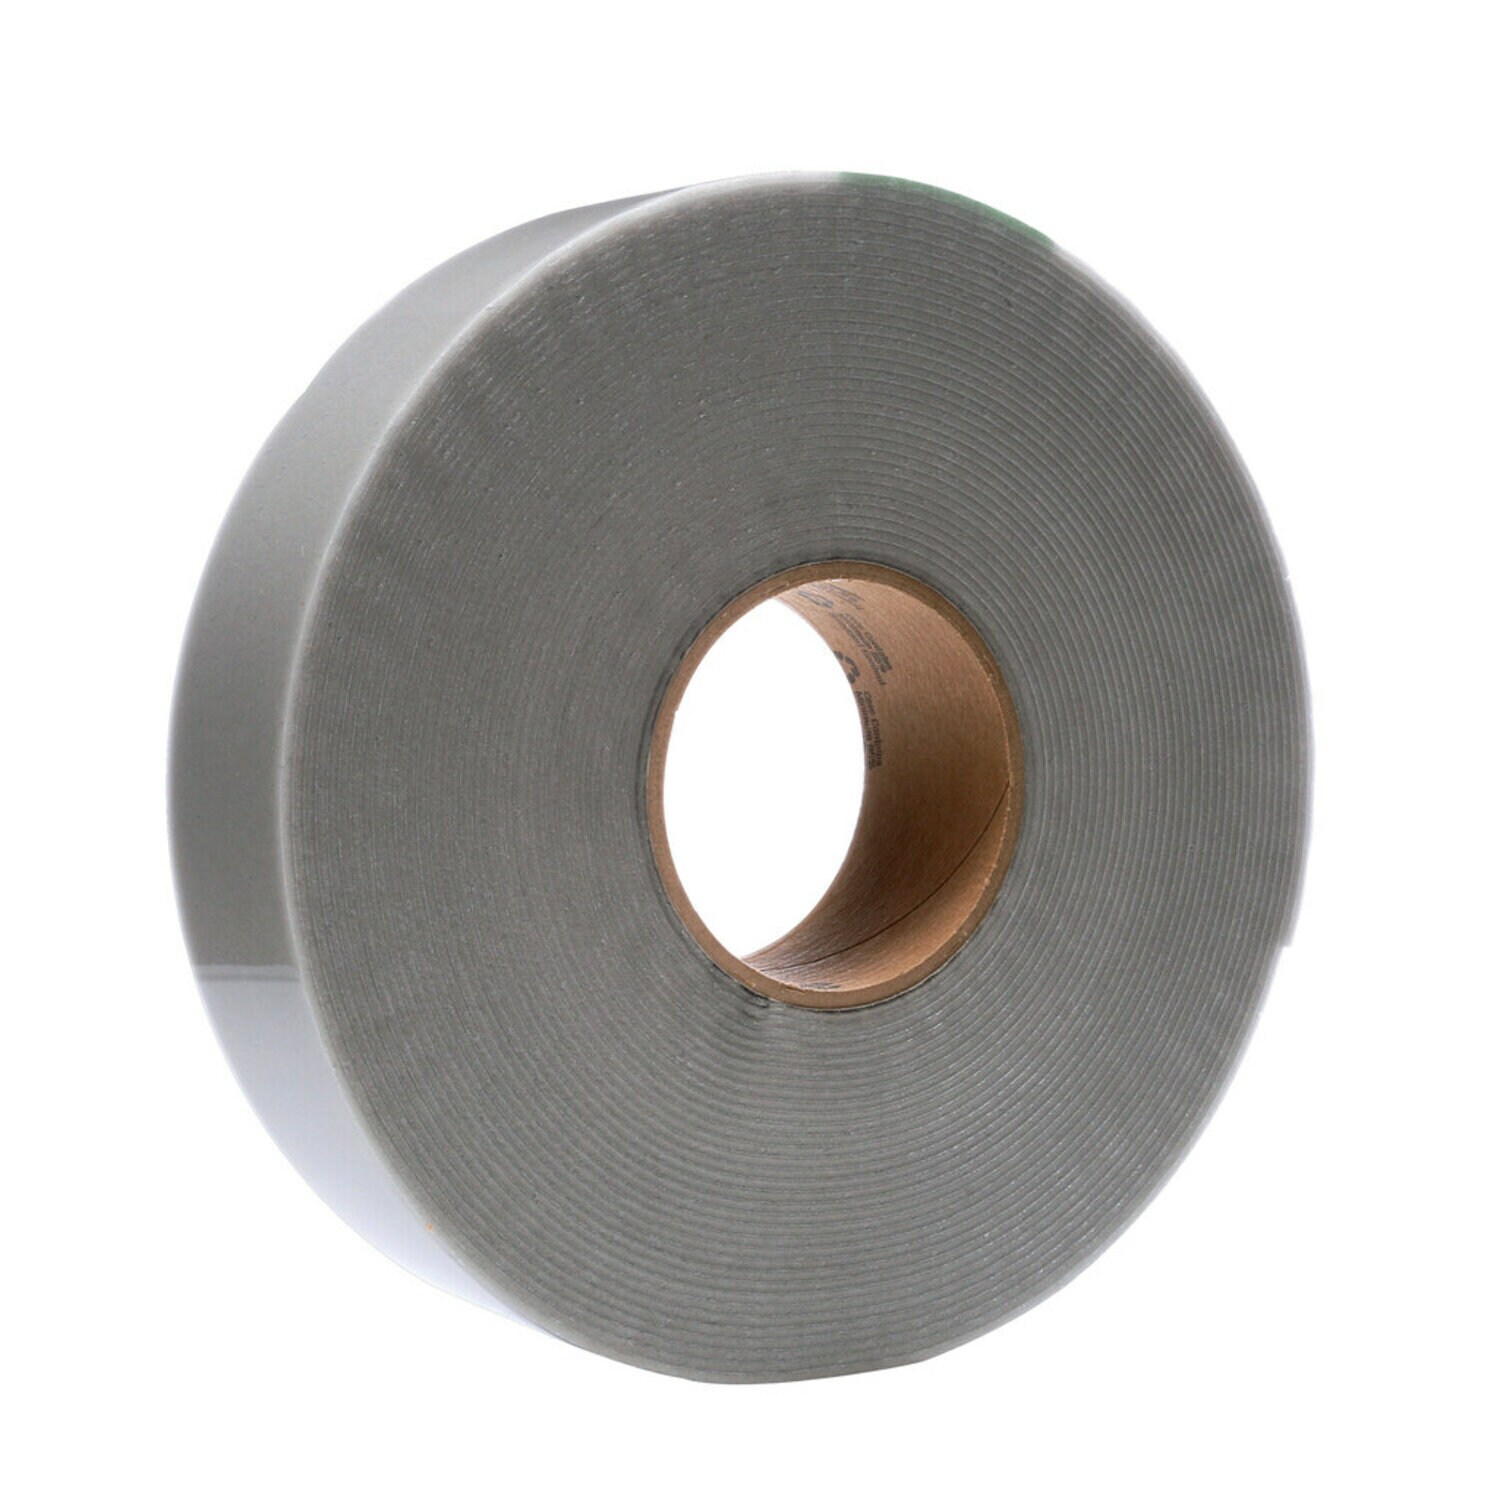 7000047348 - 3M Extreme Sealing Tape 4412G, Gray, 2 in x 18 yd, 80 mil, 6 rolls per
case